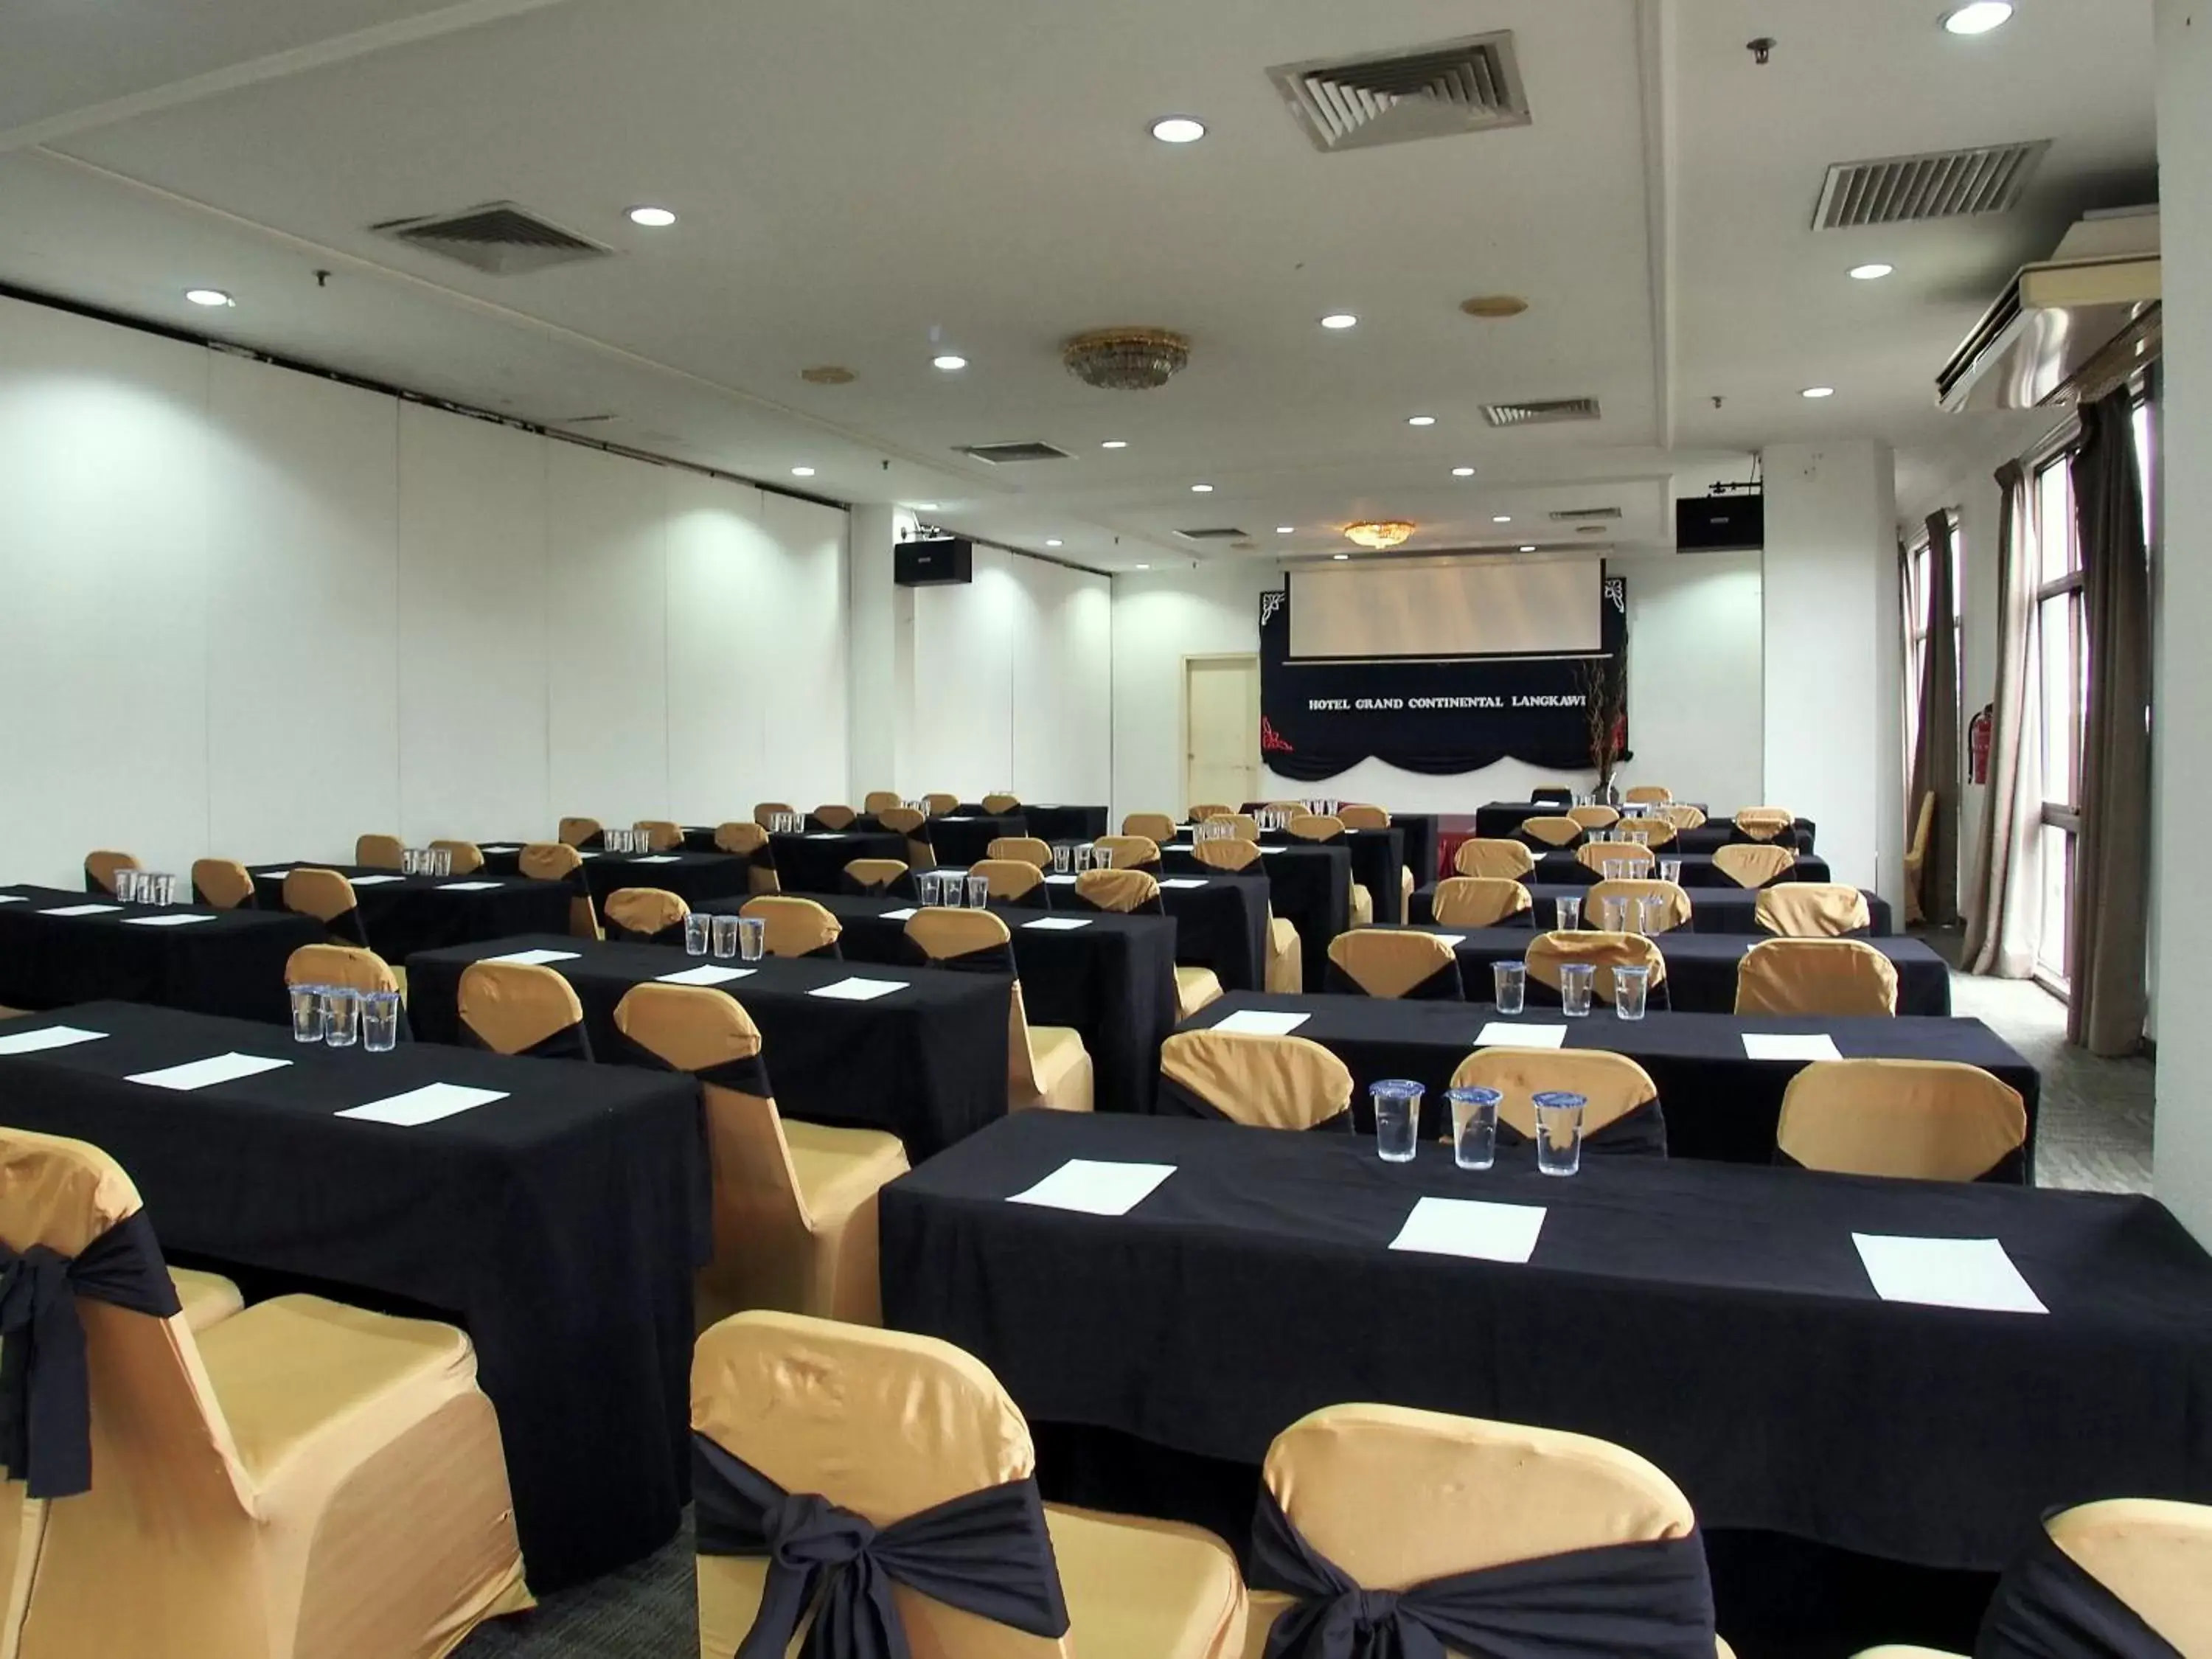 Area and facilities, Business Area/Conference Room in Hotel Grand Continental Langkawi